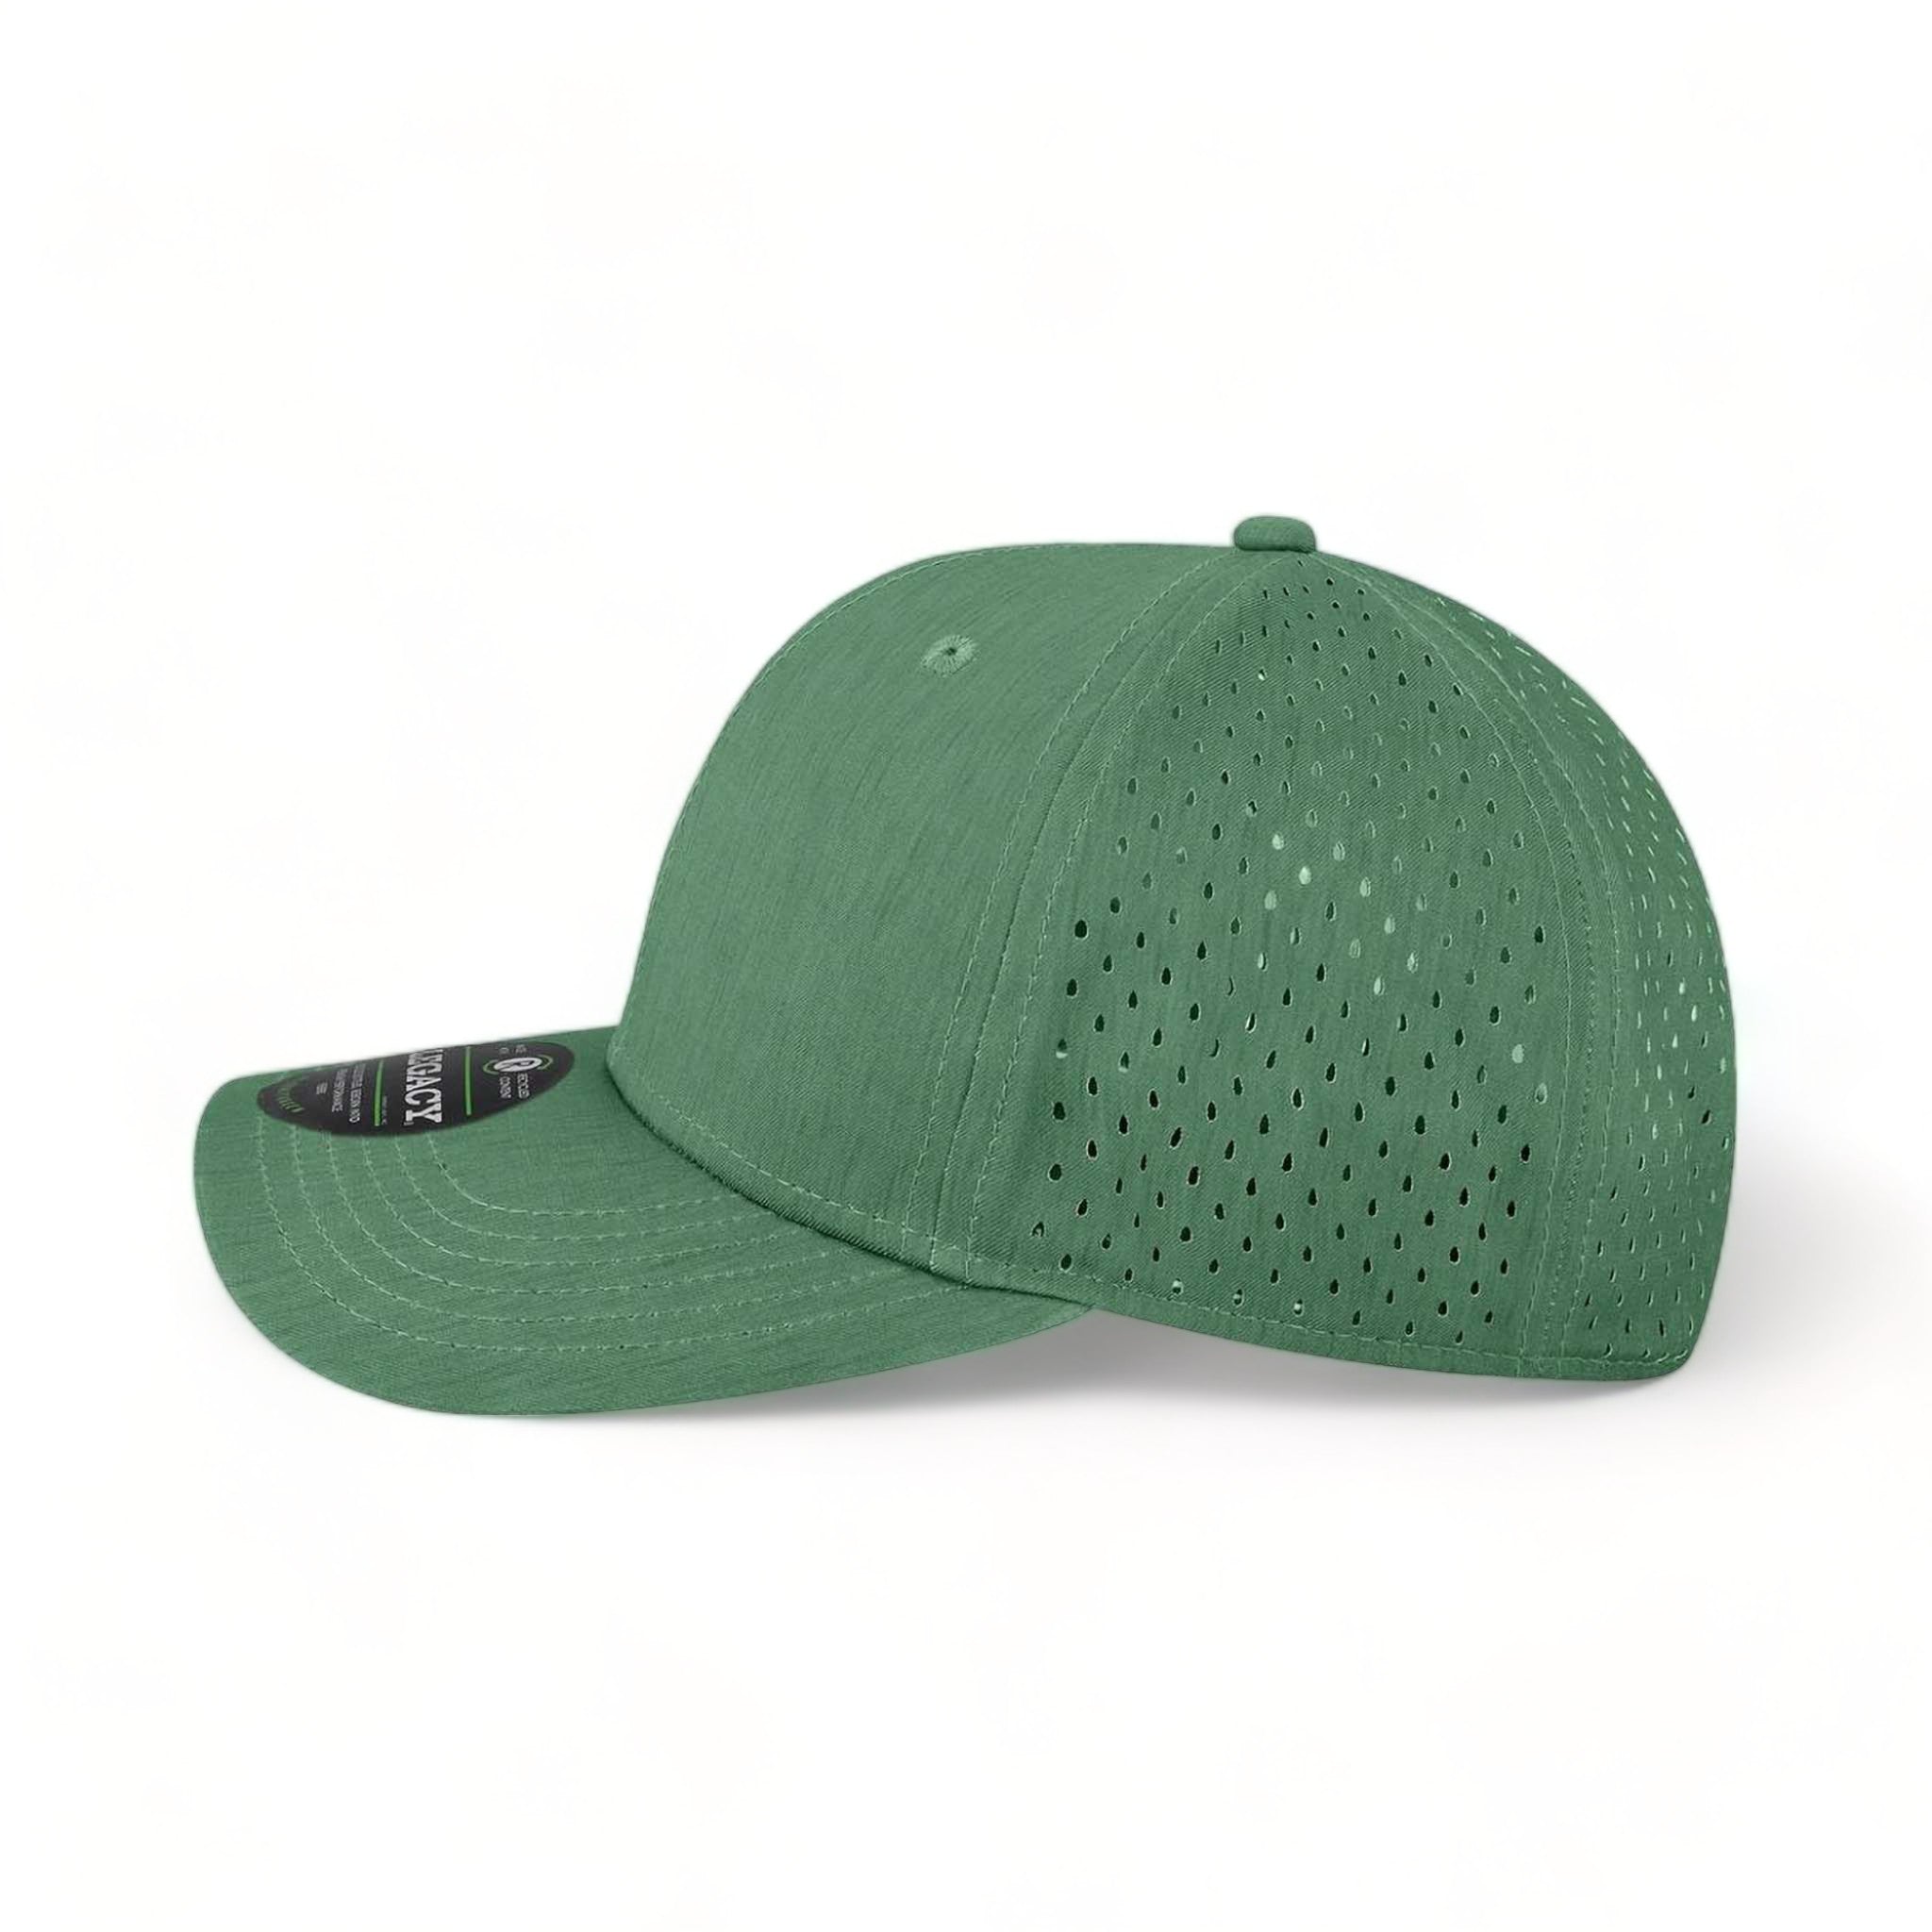 Side view of LEGACY REMPA custom hat in eco dark green